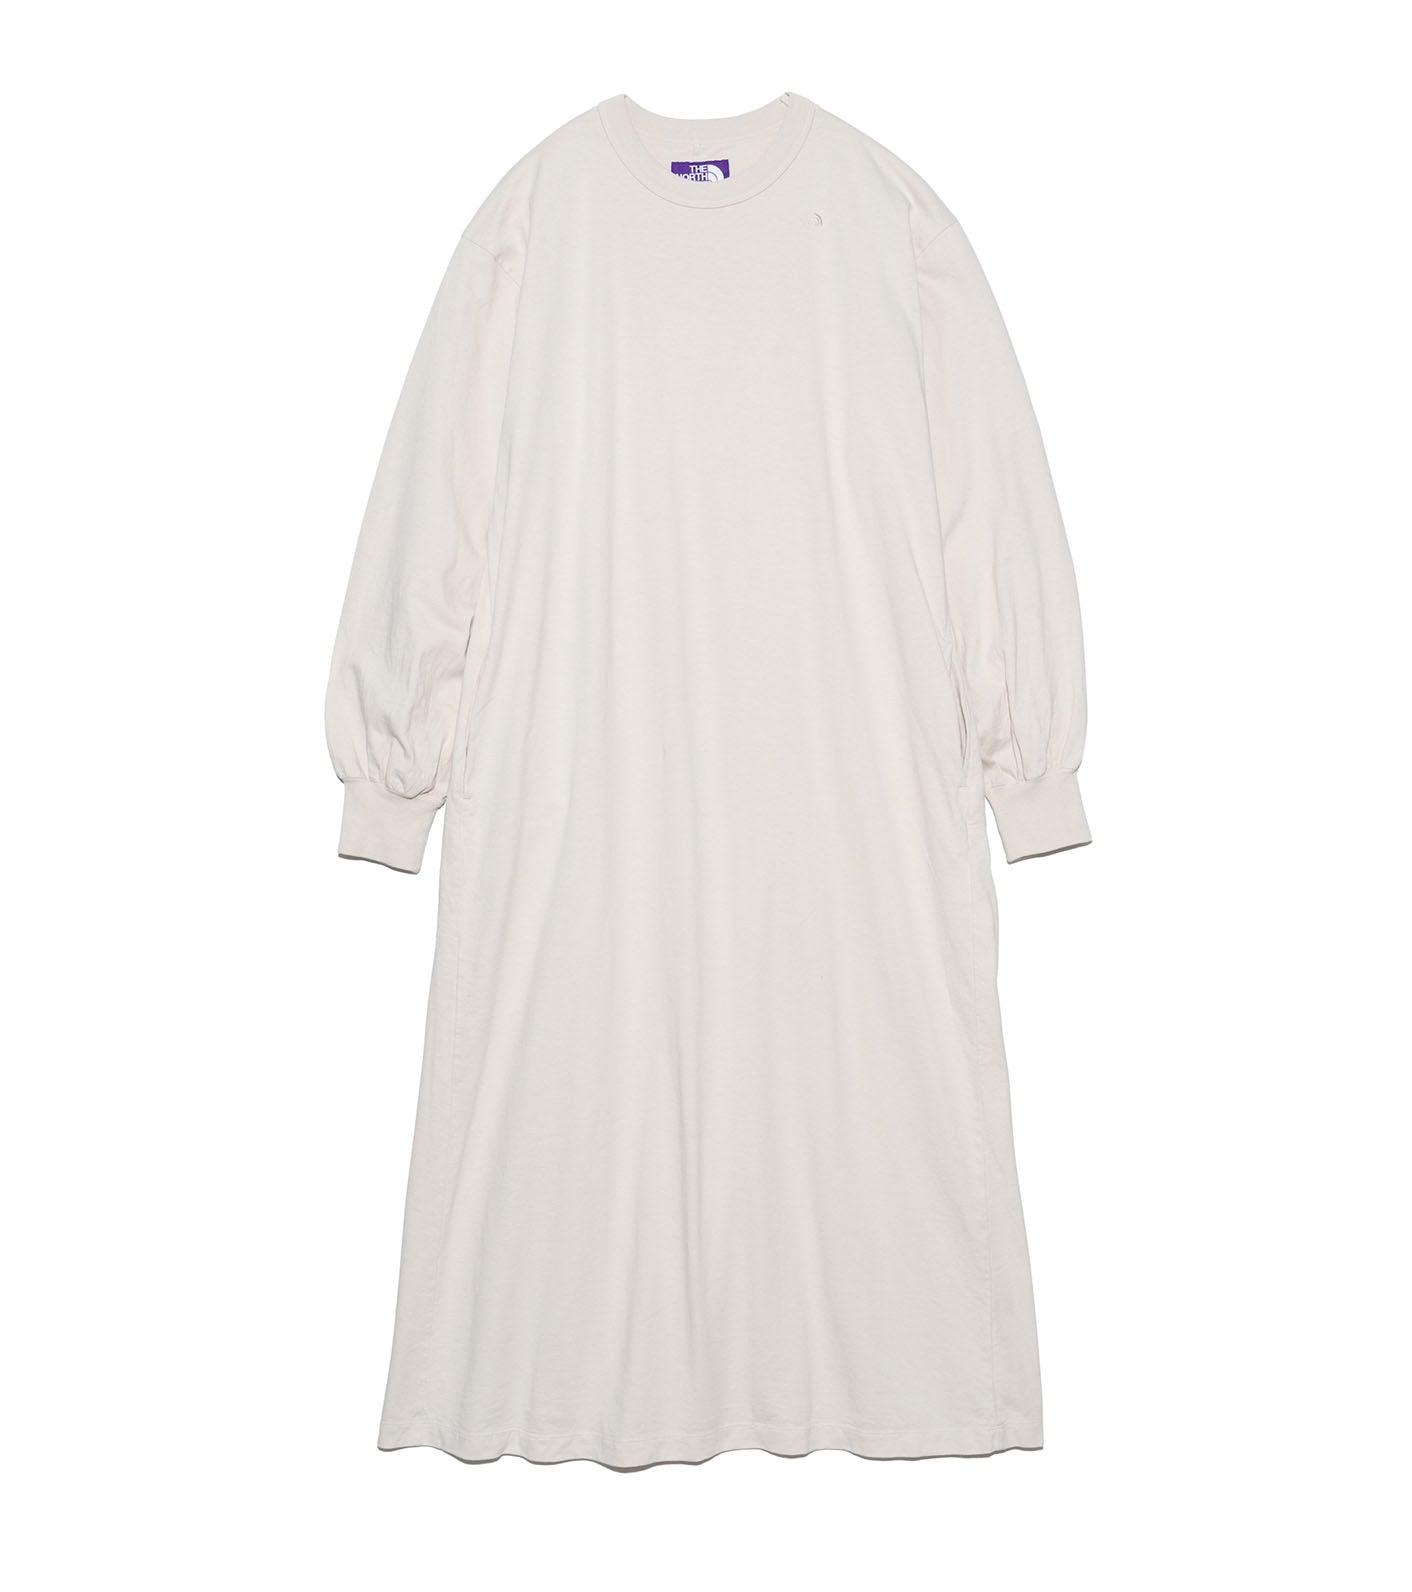 THE NORTH FACE PURPLE LABEL 5.5oz Long Sleeve Dress